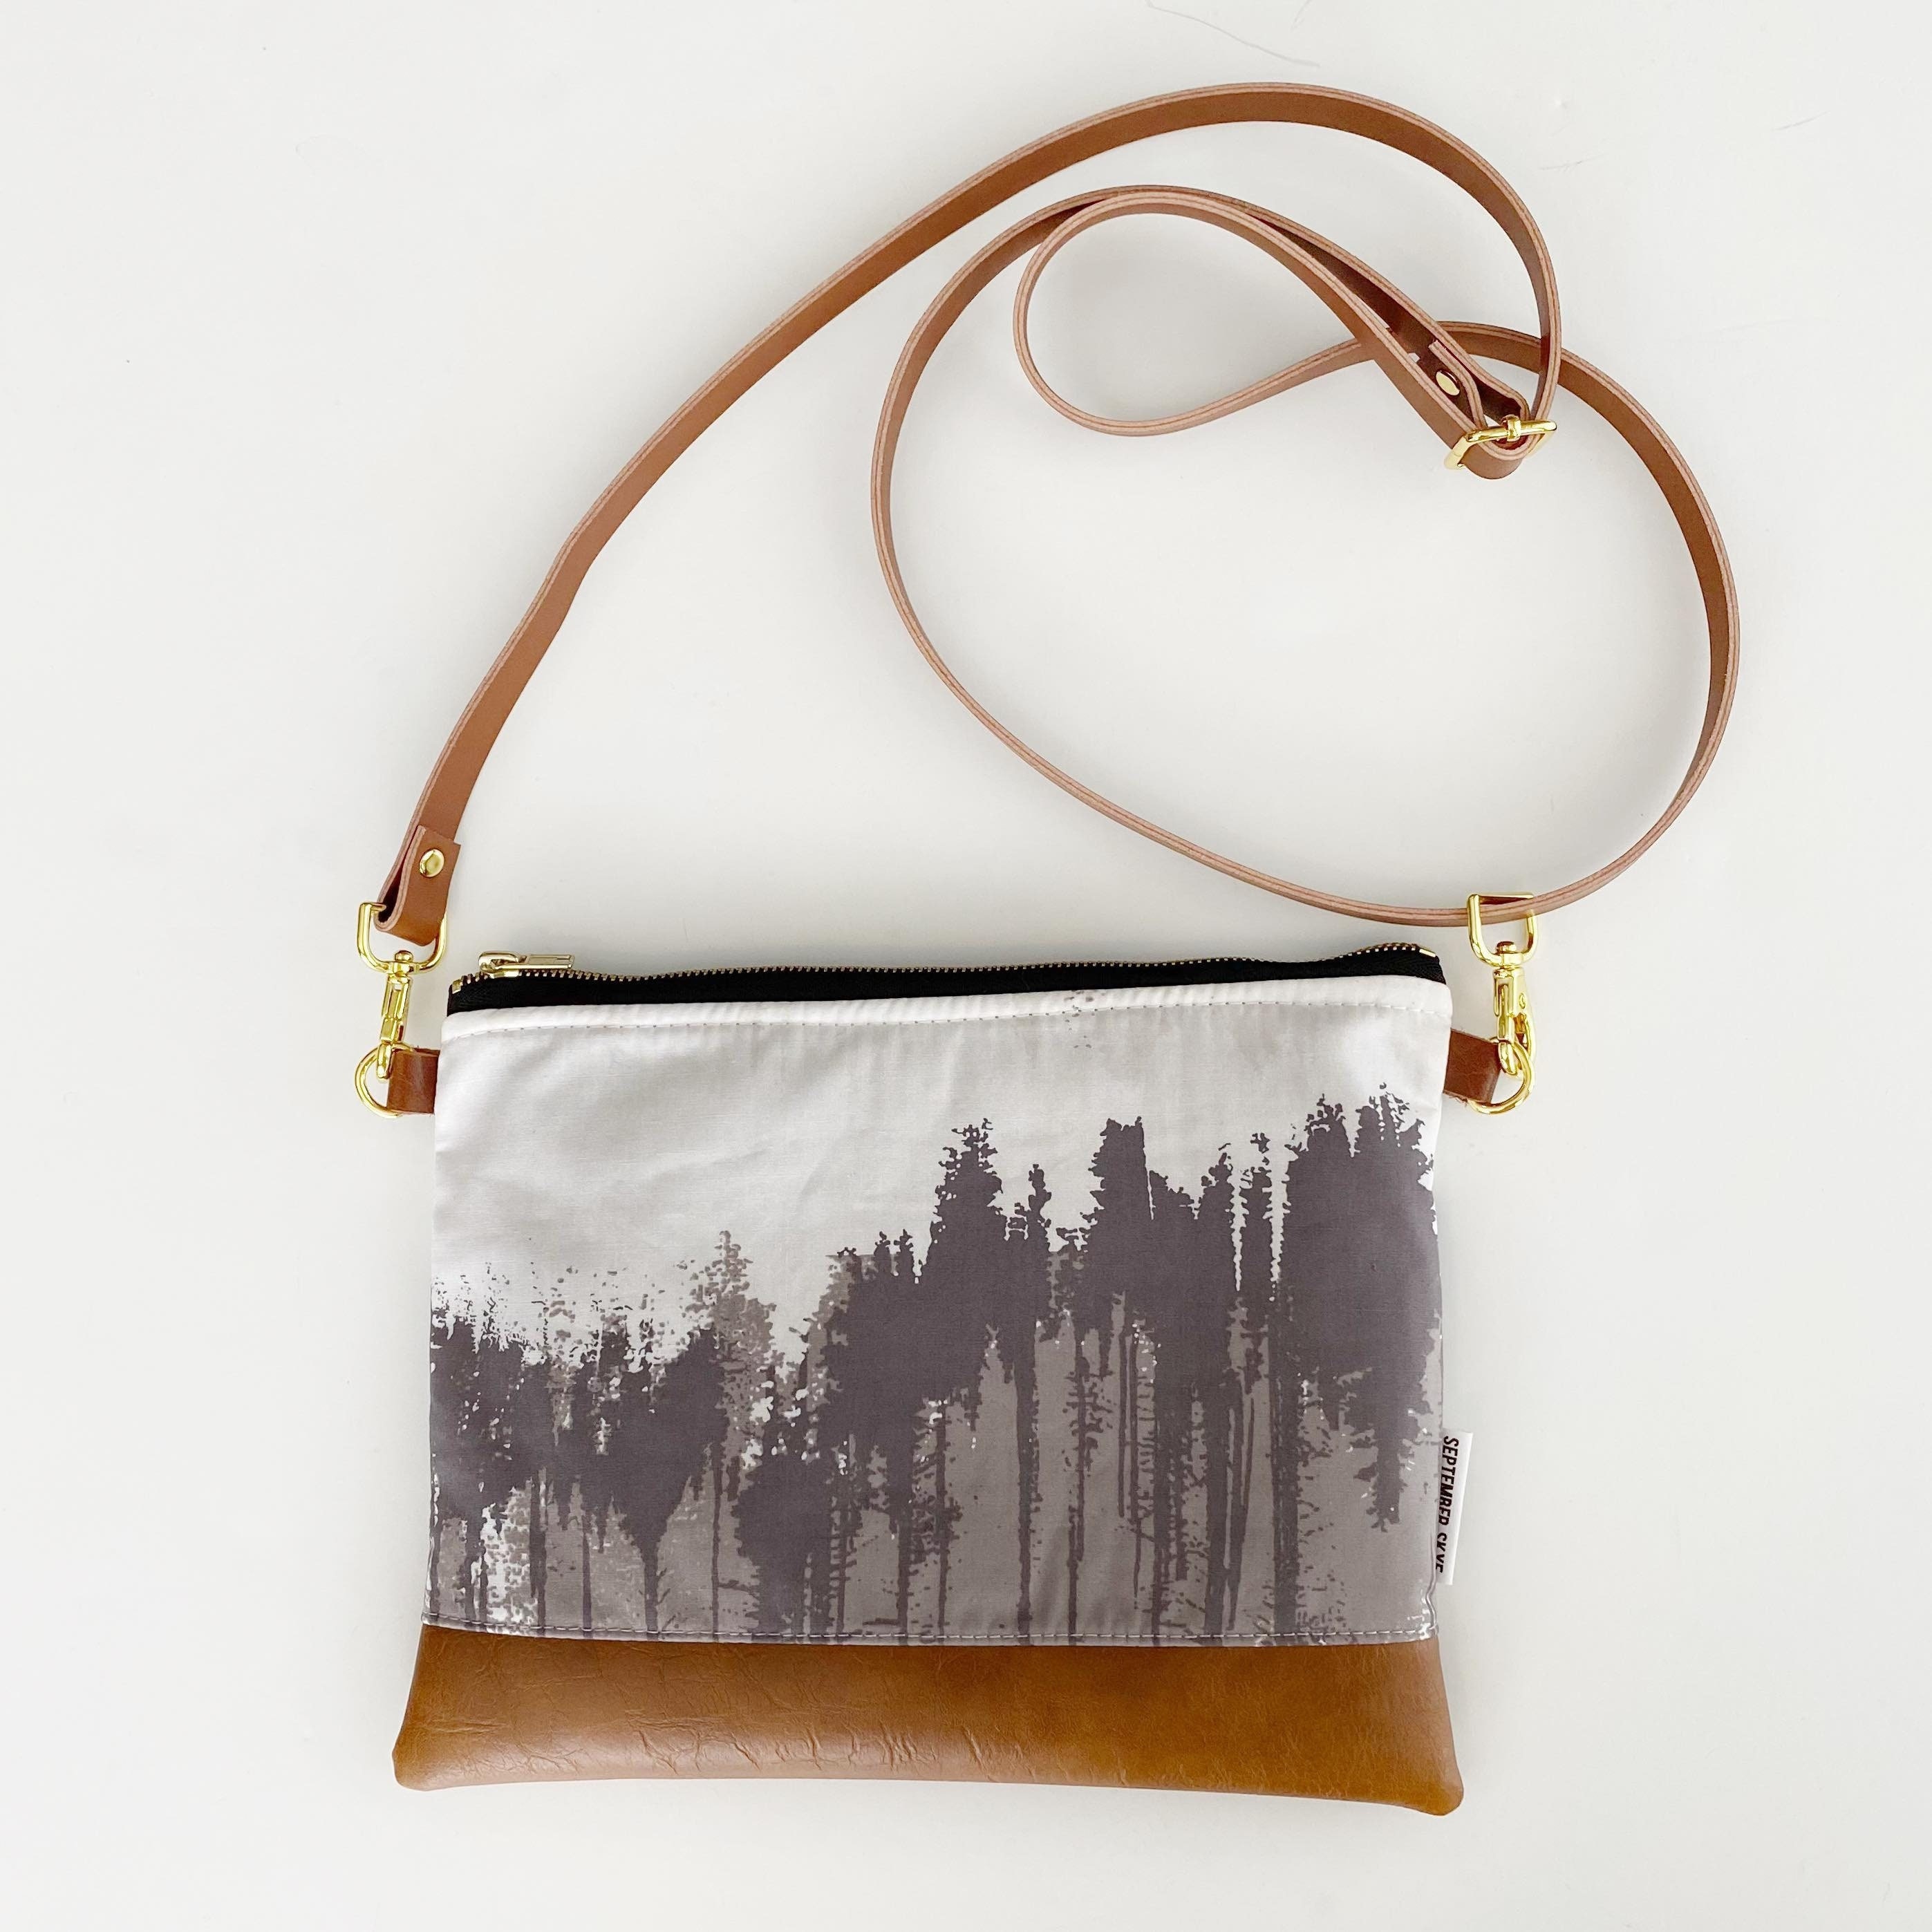 LITTLE TREE bag with wrist and cross body strap